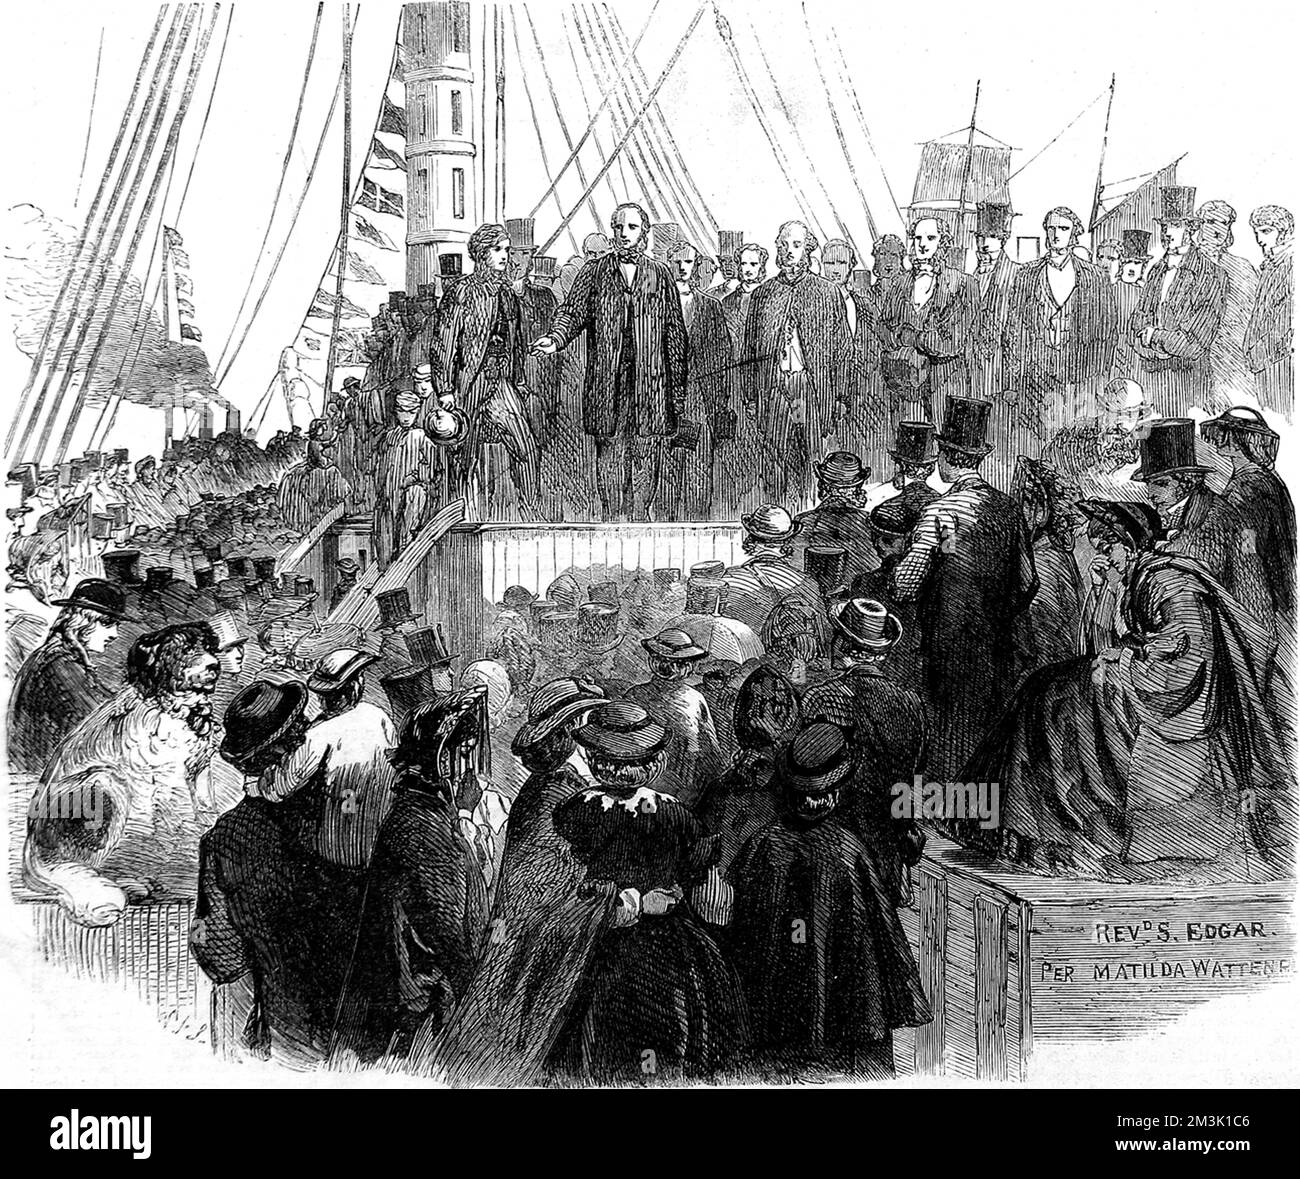 Emigrants on board the 'Matilda Wattenbach', as their ship heads down the River Thames on the journey to New Zealand, 1862.   These emigrants, 800 non-conformists from London, were heading for the then-new colony of Albertland, New Zealand.  1862 Stock Photo